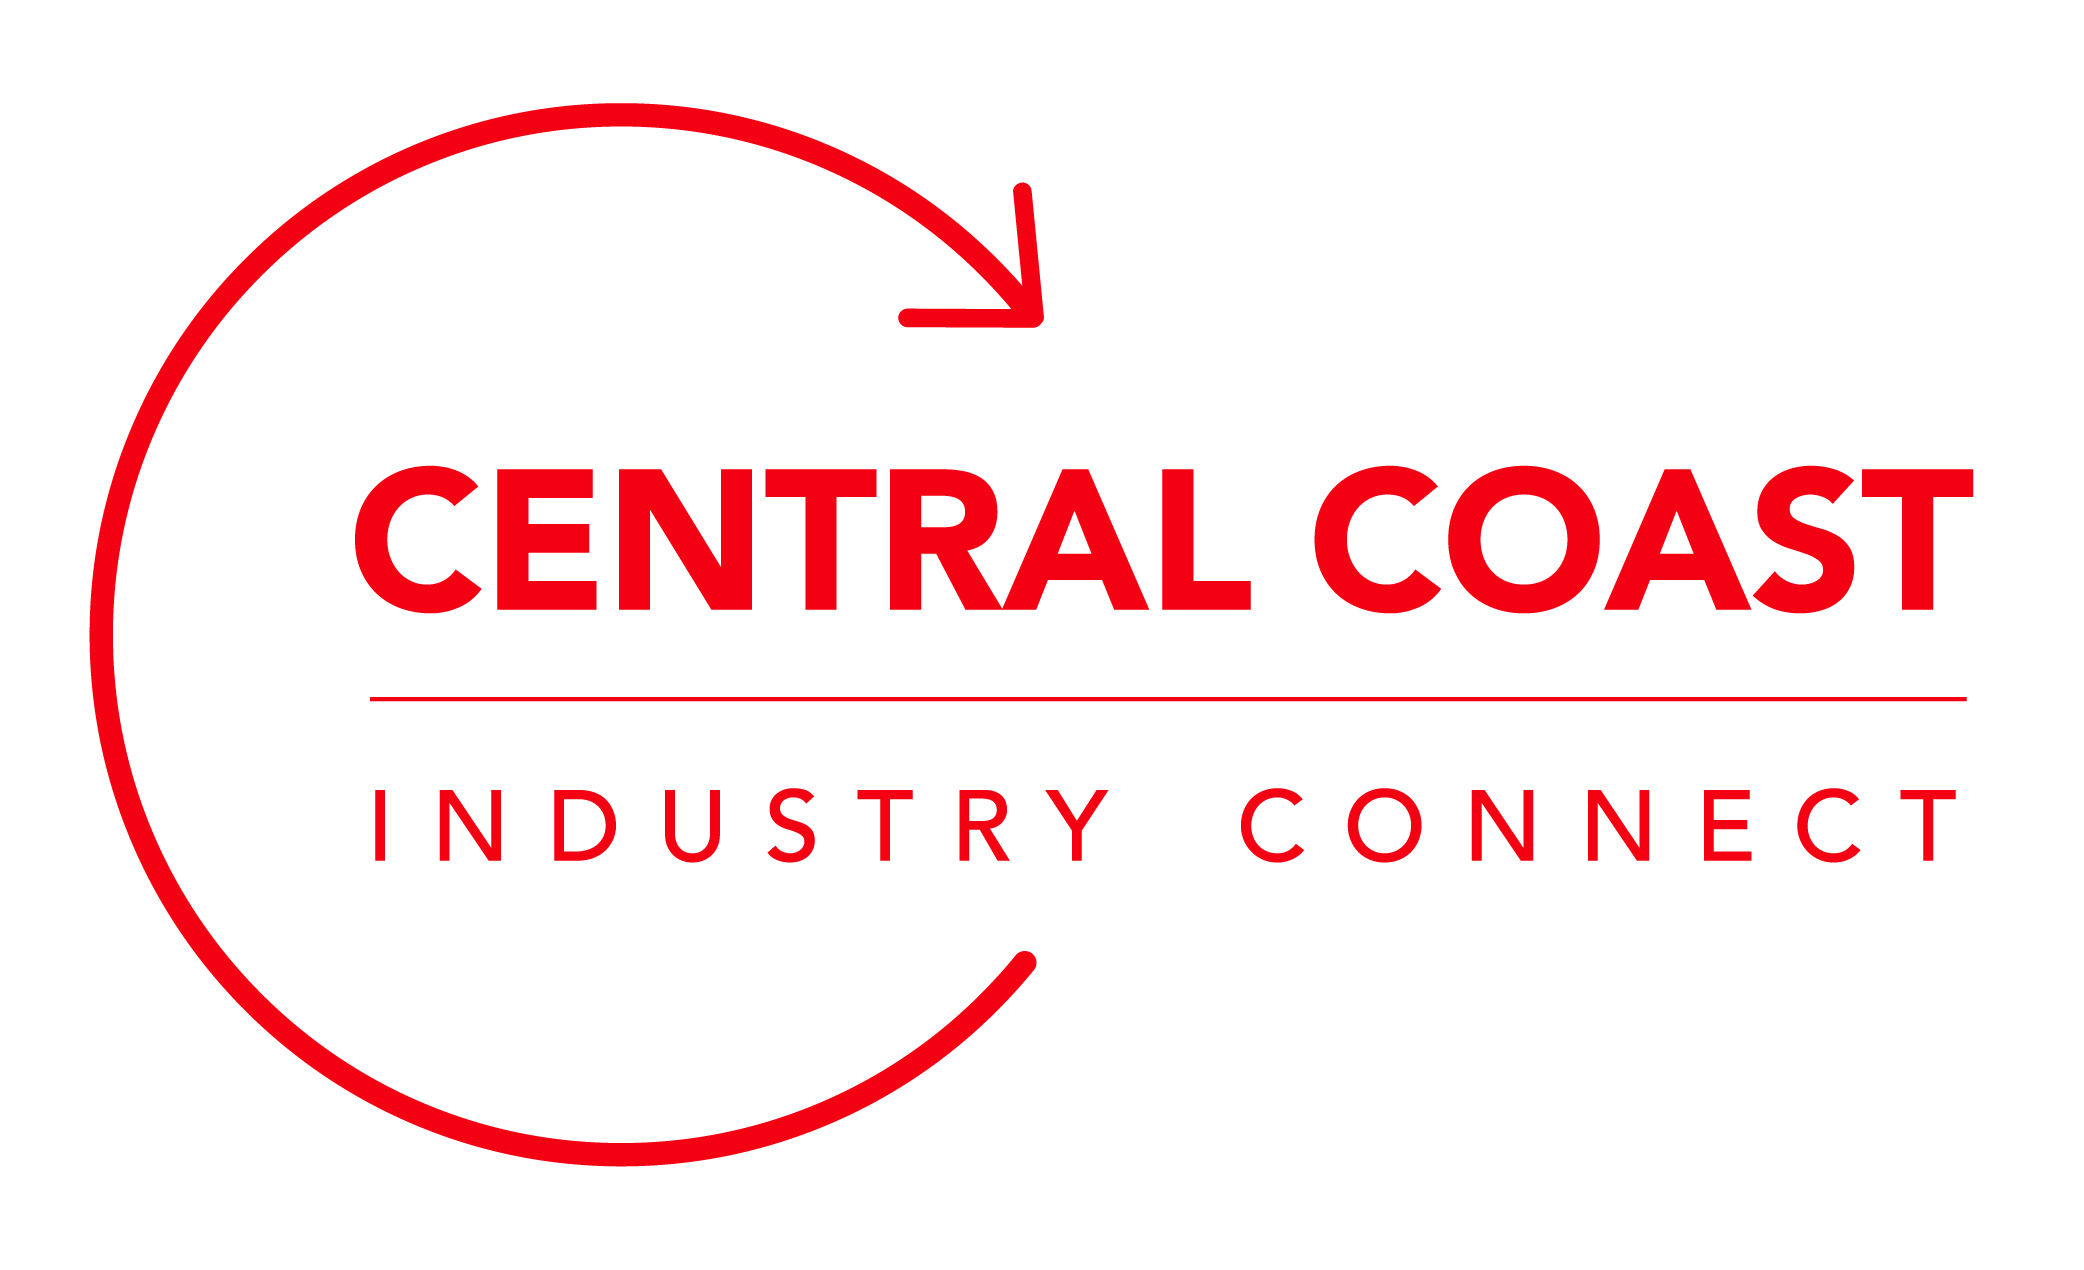 Central Coast Industry Connect